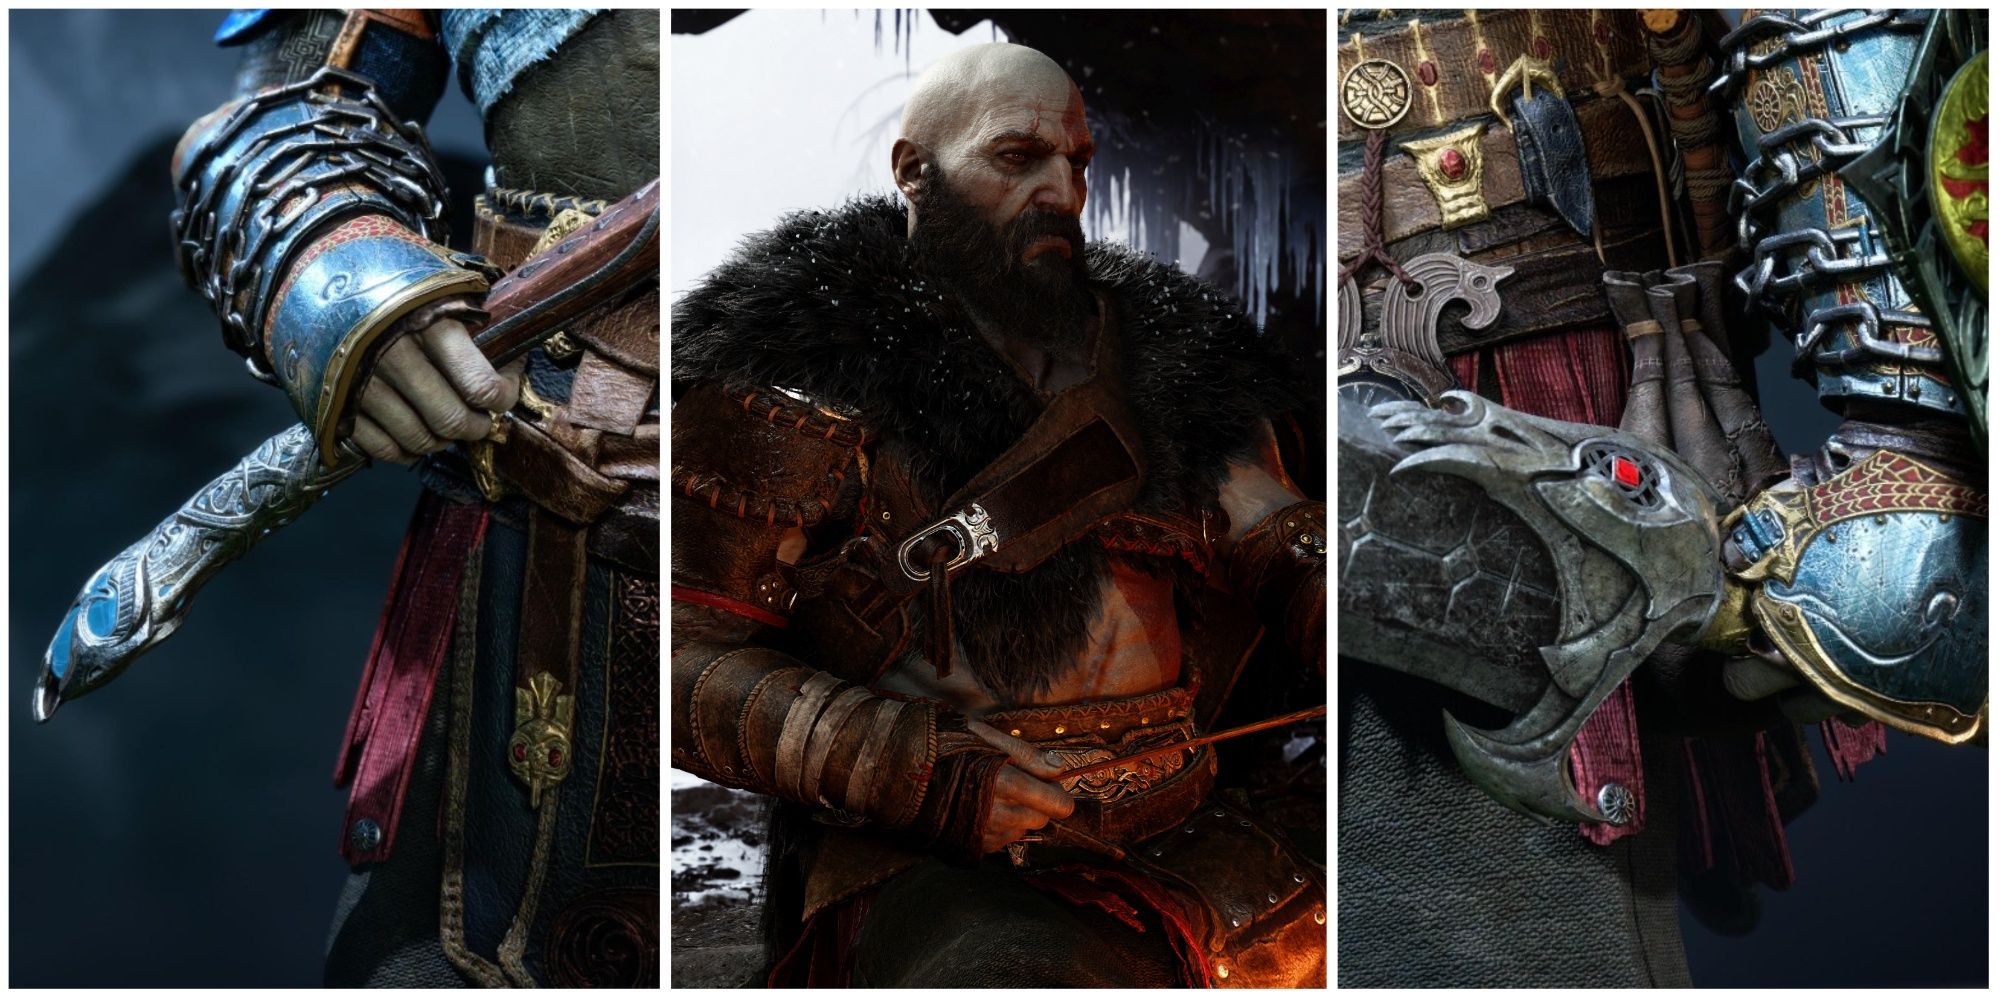 God of War Ragnarok collage with Kratos in the center, the Stonecutter's Knob on the left, and the Radiant Warden Handles on the right